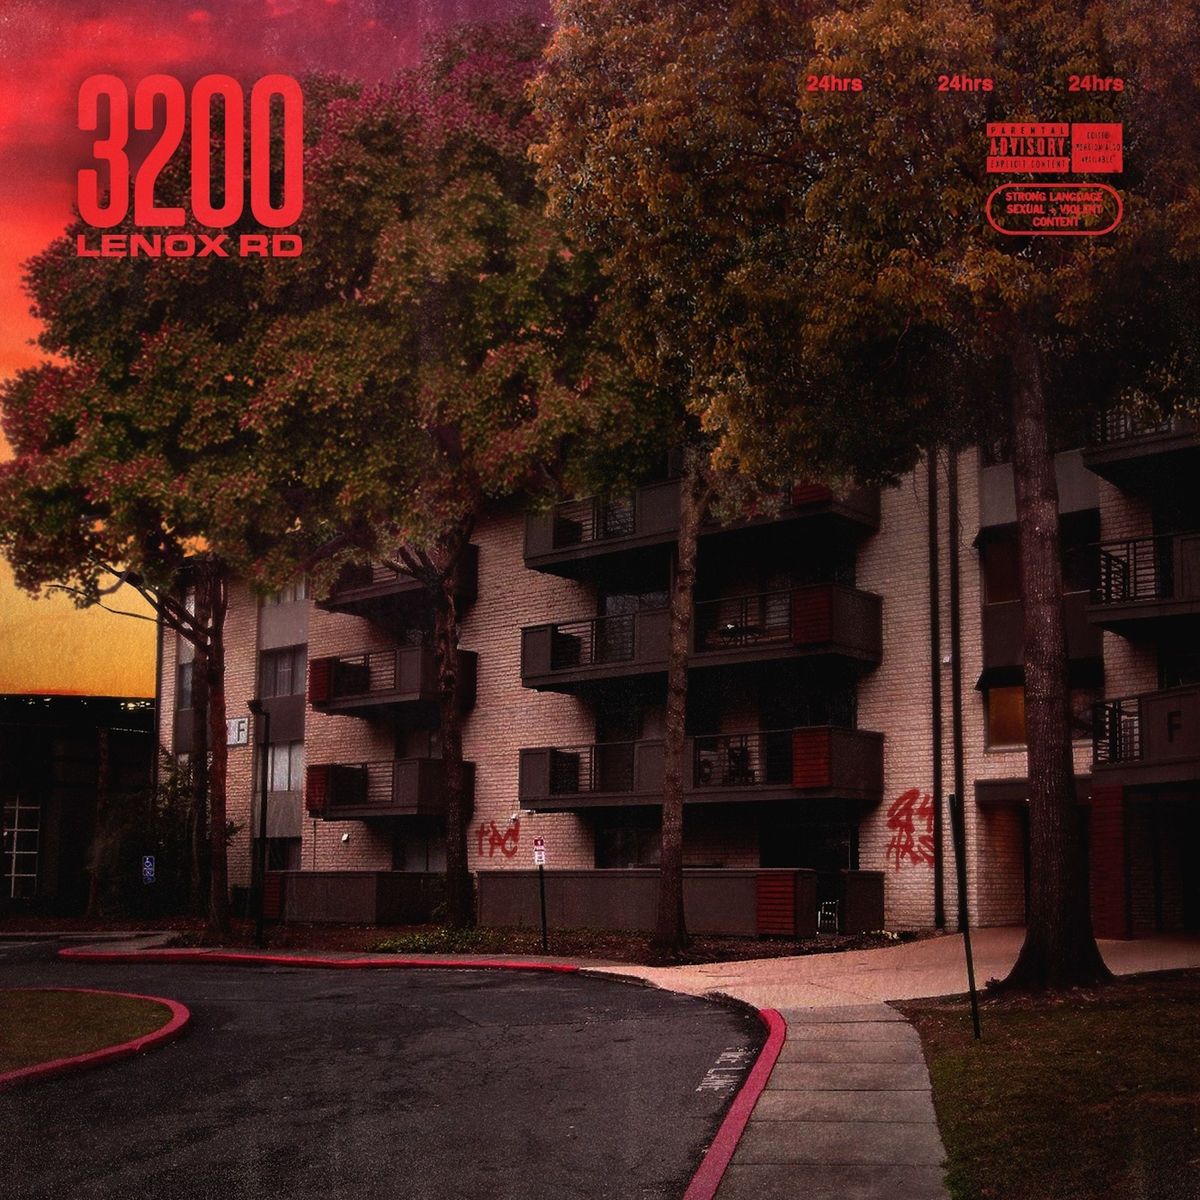 Stream 24hrs & SlickLaflare’s Joint Project “3200 Lenox RD”